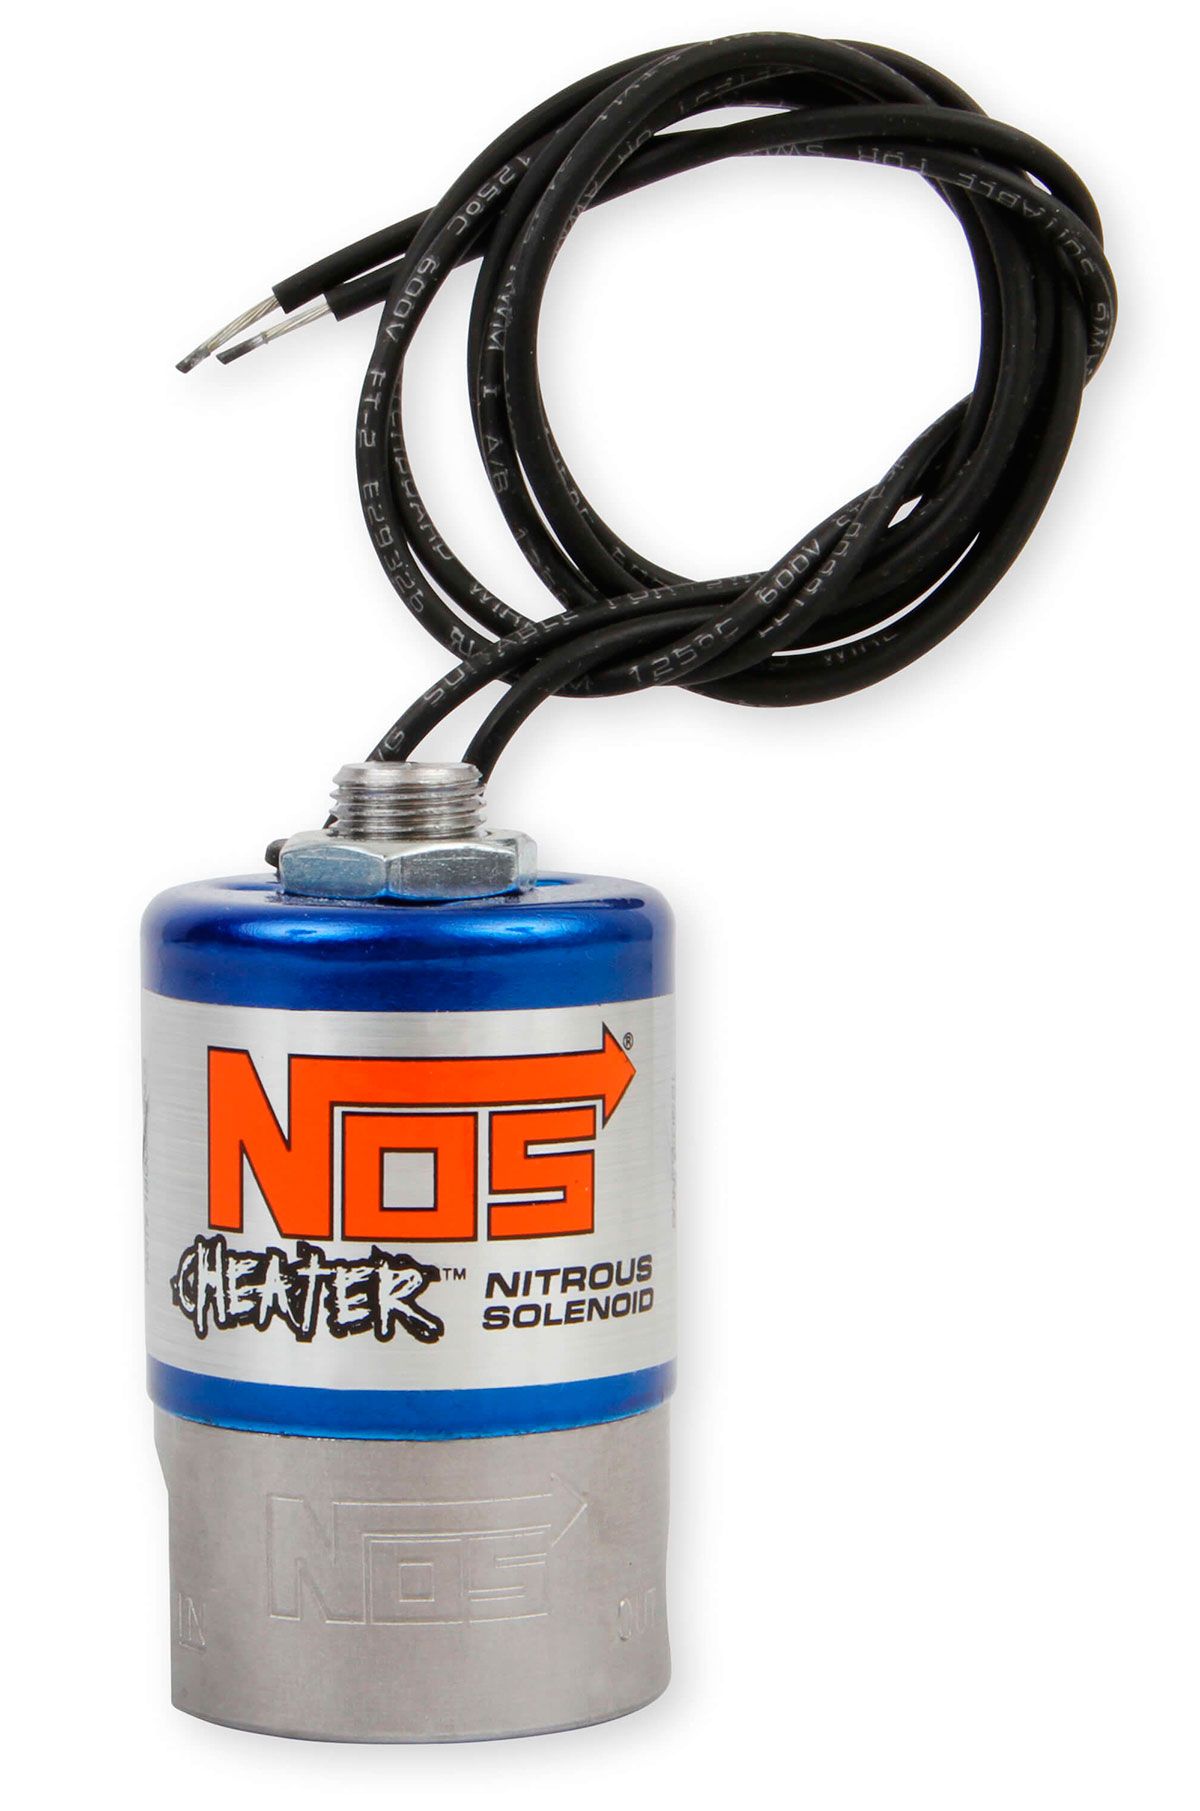 NOS18000 - CHEATER NITROUS SOLENOID UP TO